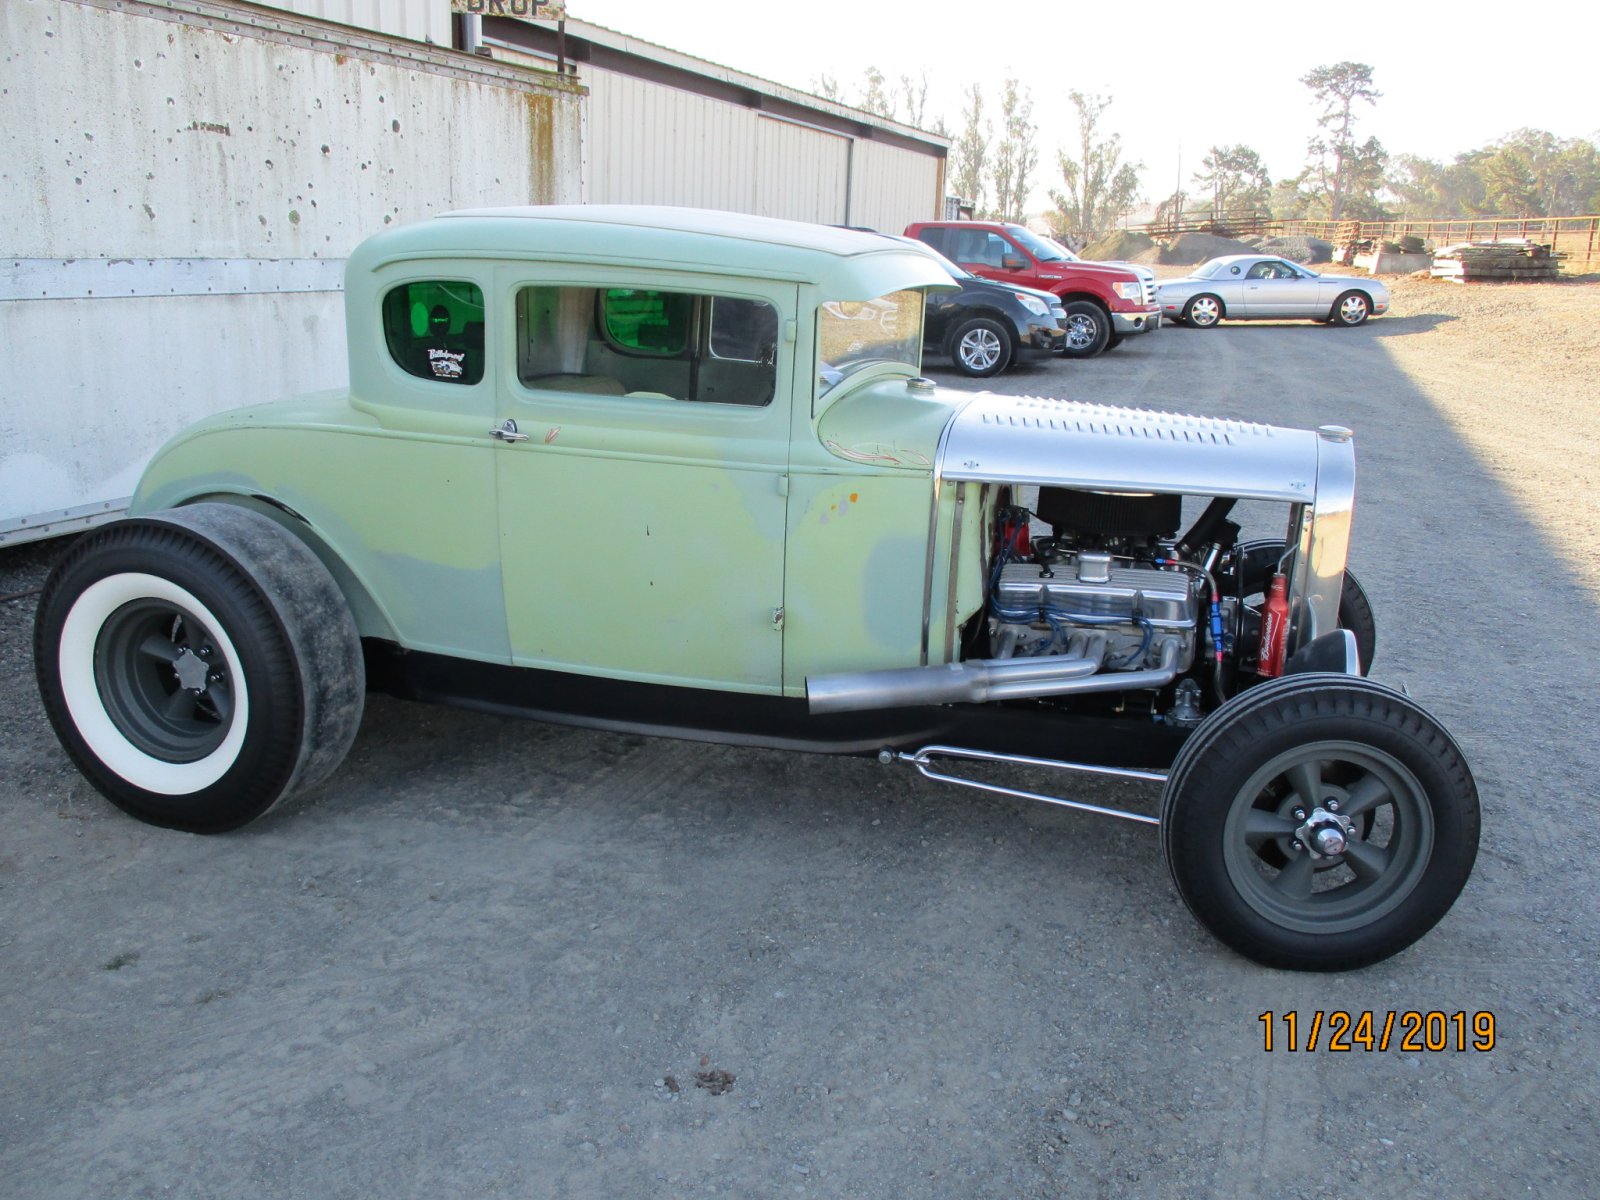 Hot Rods - HIBOYS -TALL & SKINNY or FAT and WIDE TIRES | The H.A.M.B.